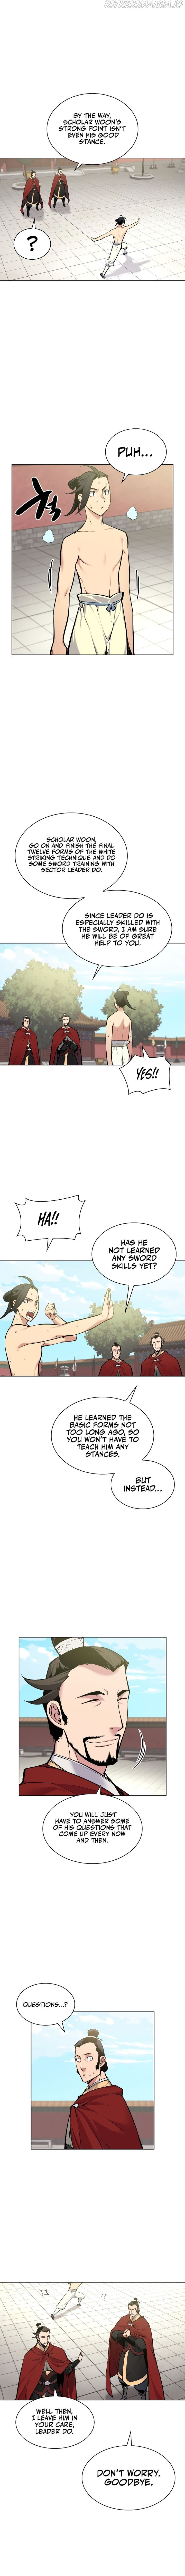 Records of the Swordsman Scholar chapter 2